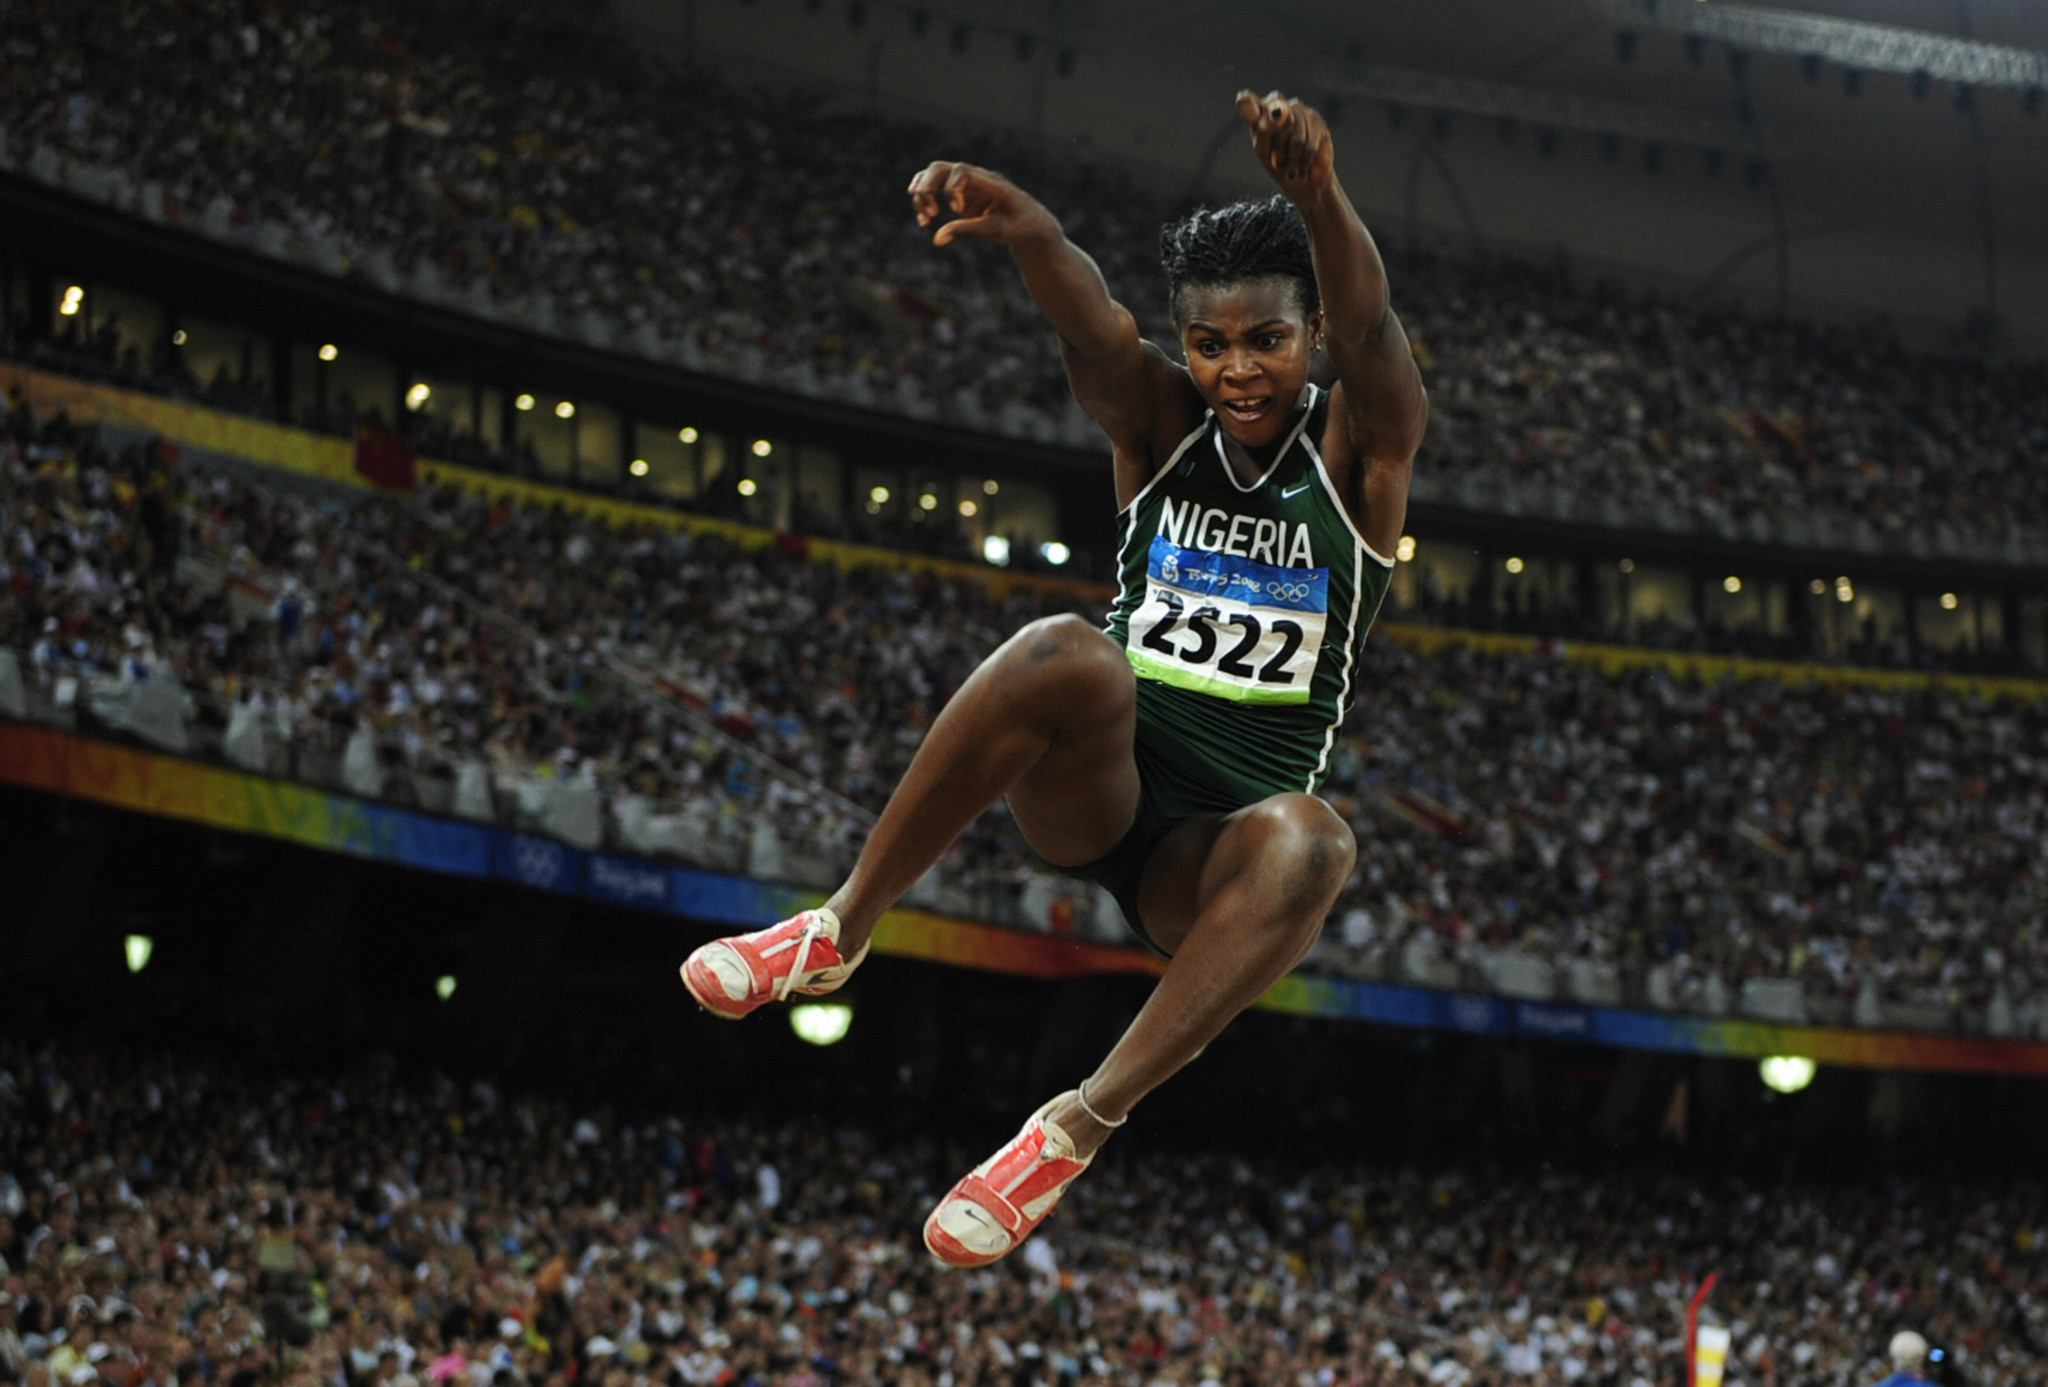 Blessing Okagbare won the Olympic silver medal in the long jump at Beijing 2008 ©Getty Images